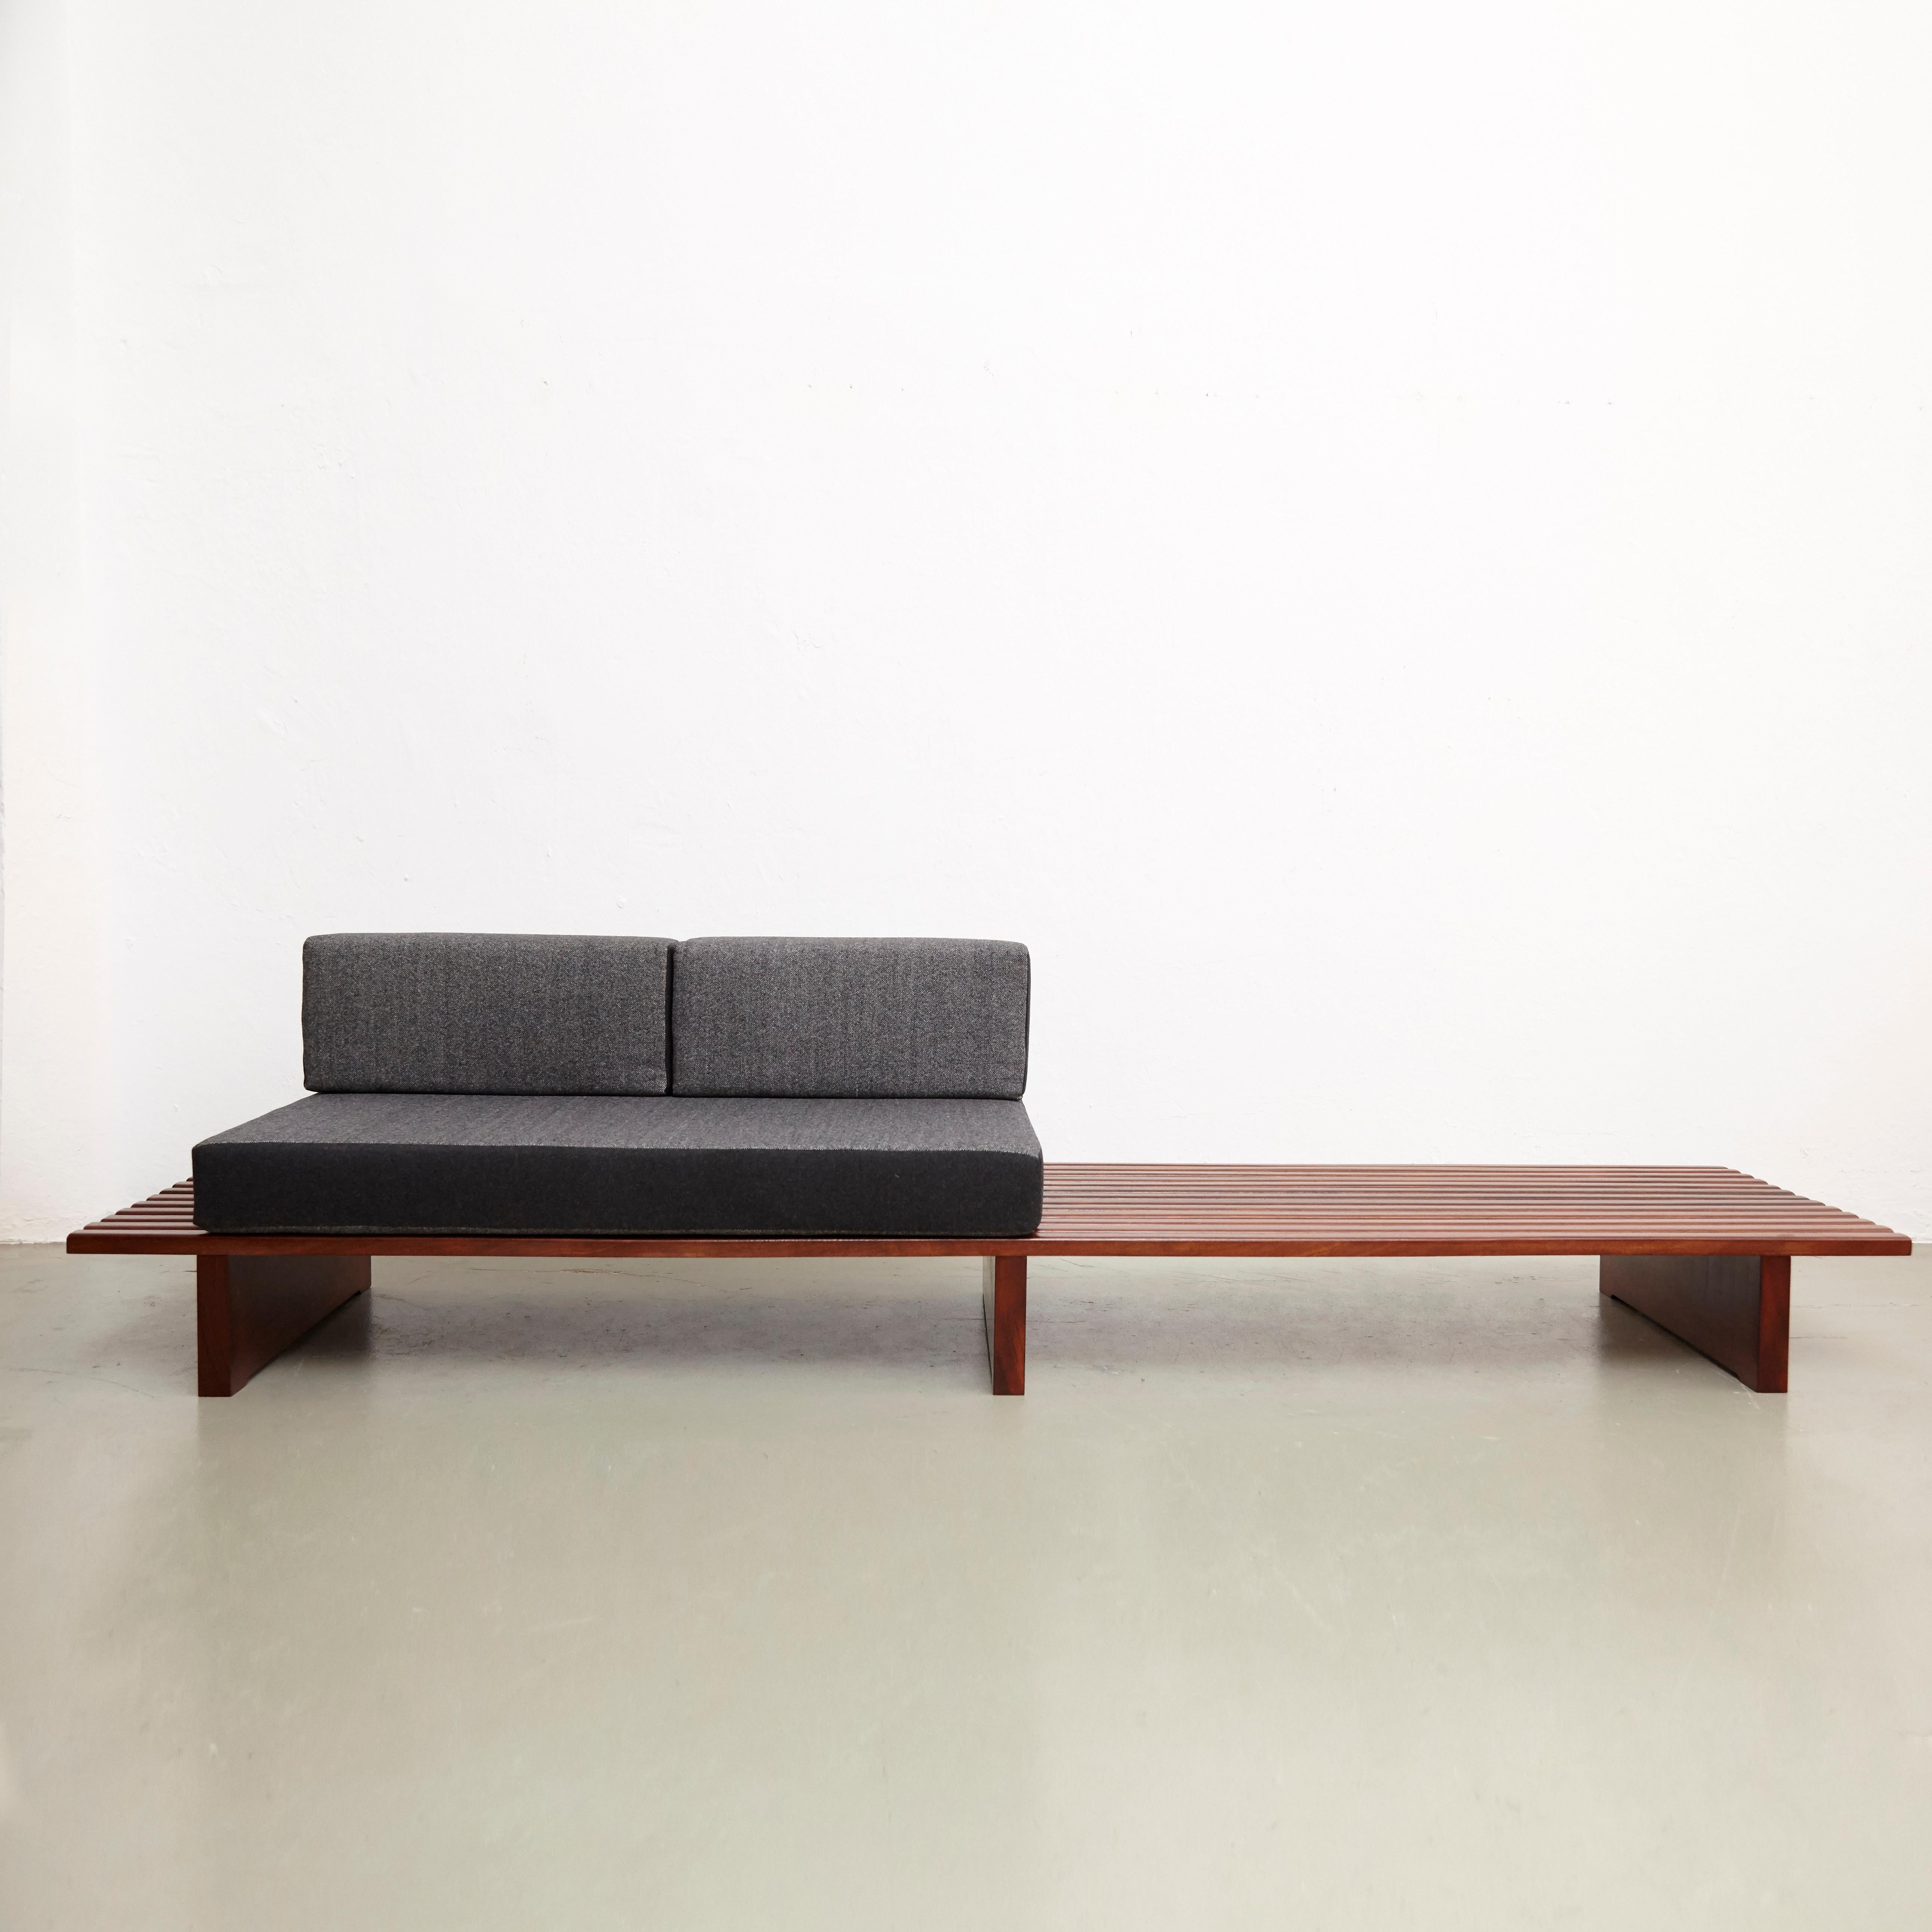 Bench designed by Charlotte Perriand, circa 1950.
This model is with 13 slats of wood.

Mahogany wood base and structure.

Wooden legs seem to be latter added by the previous owner.

The cushions have been produced now according to the